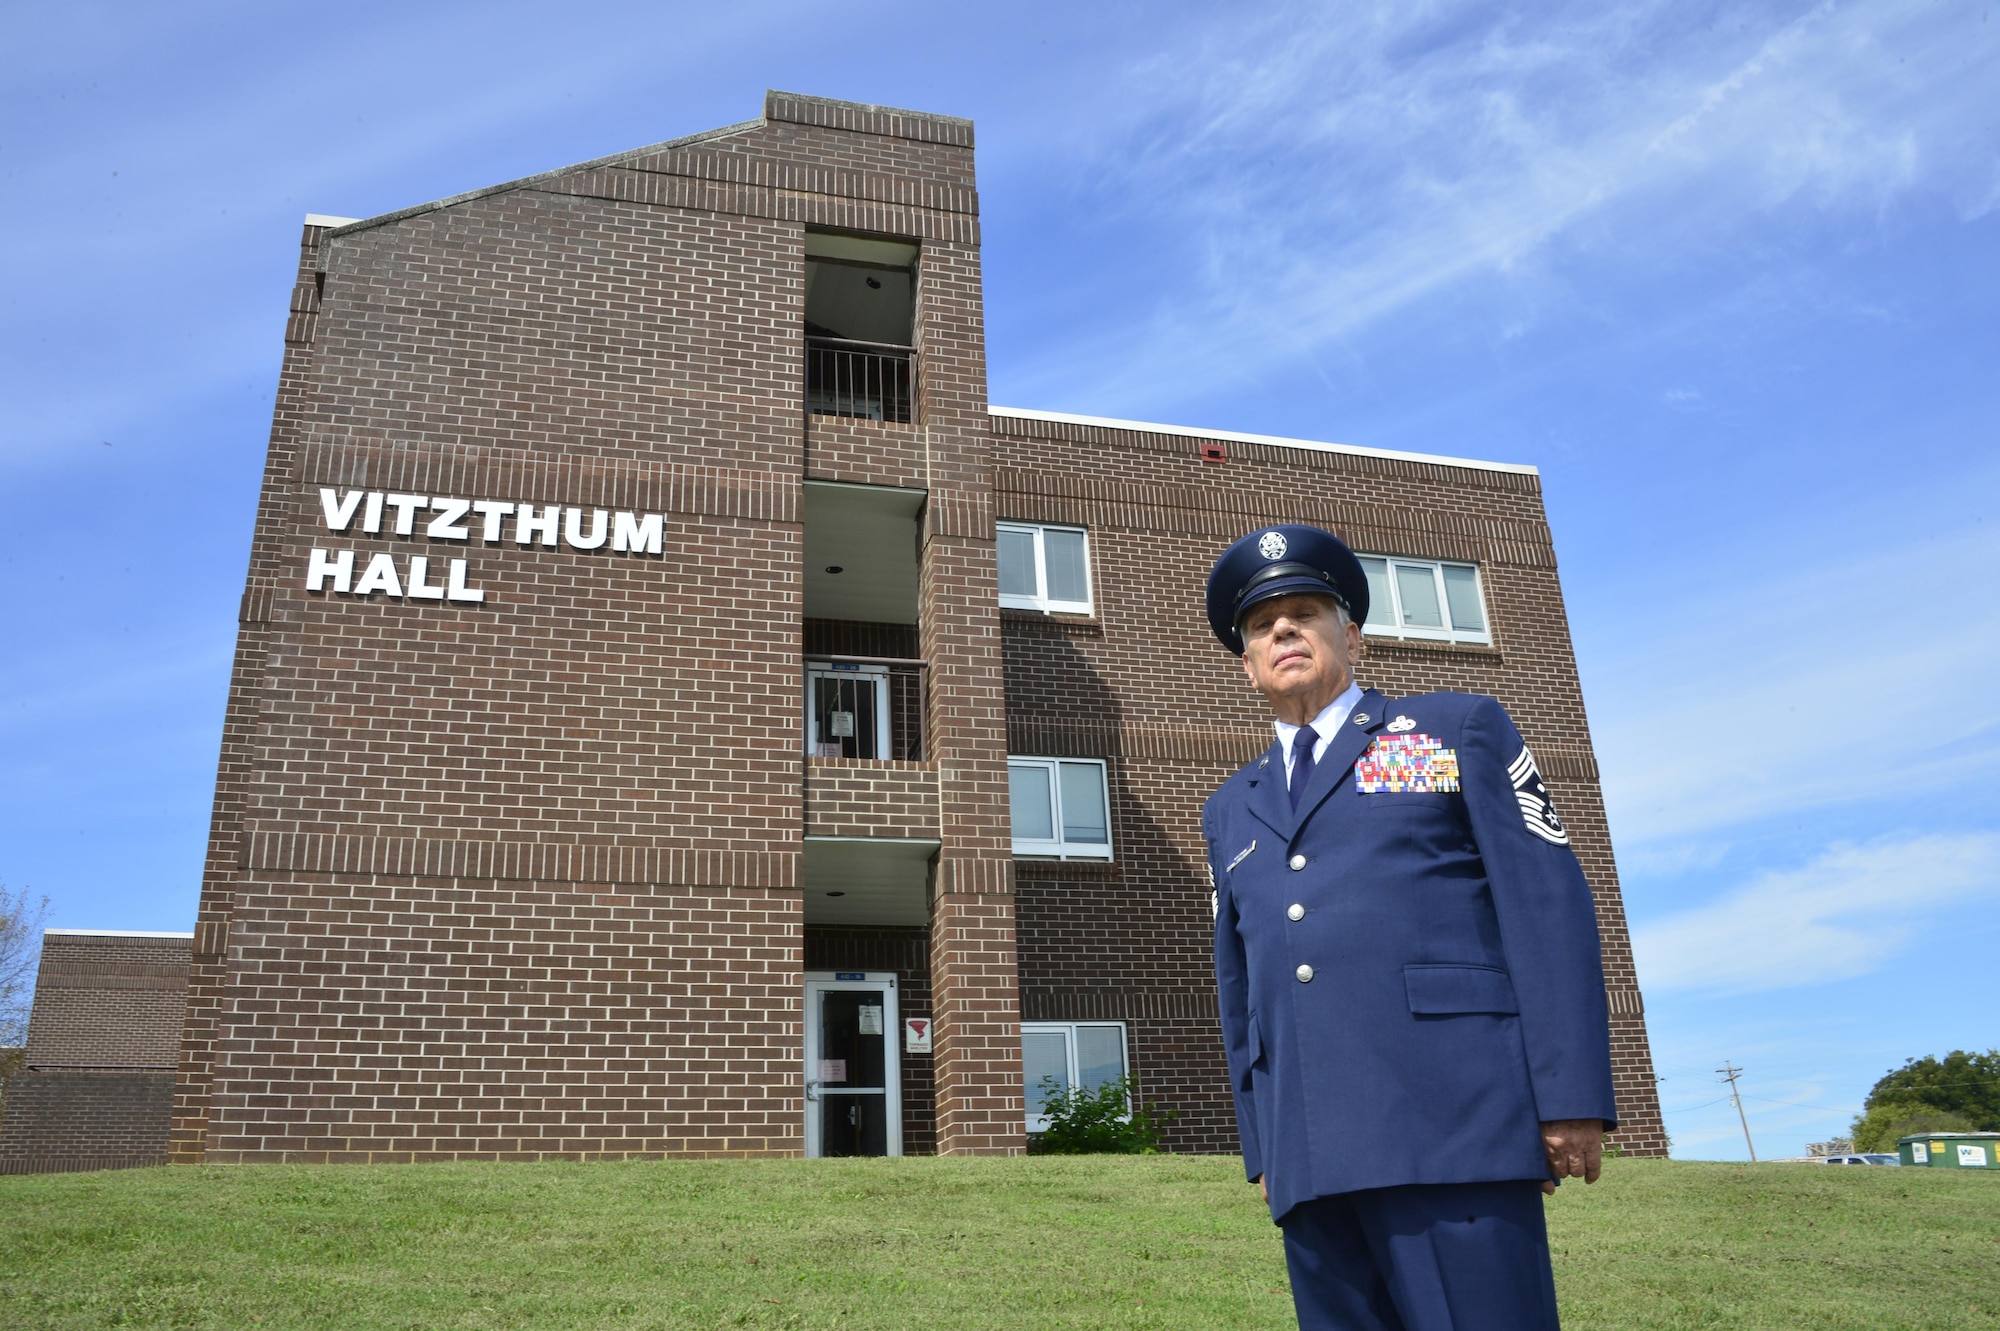 Retired Chief Master Sgt. George Vitzthum stands with the building in his name at the time of its 2015 dedication. The dormitory first opened in 1993 and began major renovations in 2016. Chief Vitzthum was part of the first leadership school and officer preparatory academy staff who then served as the second Commandant. He also instructed NCO academy. Chief Vitzthum helped develop much of the primary curriculum and contributed to the first college credits being awarded for EPME in the Air Force, among other accomplishments.